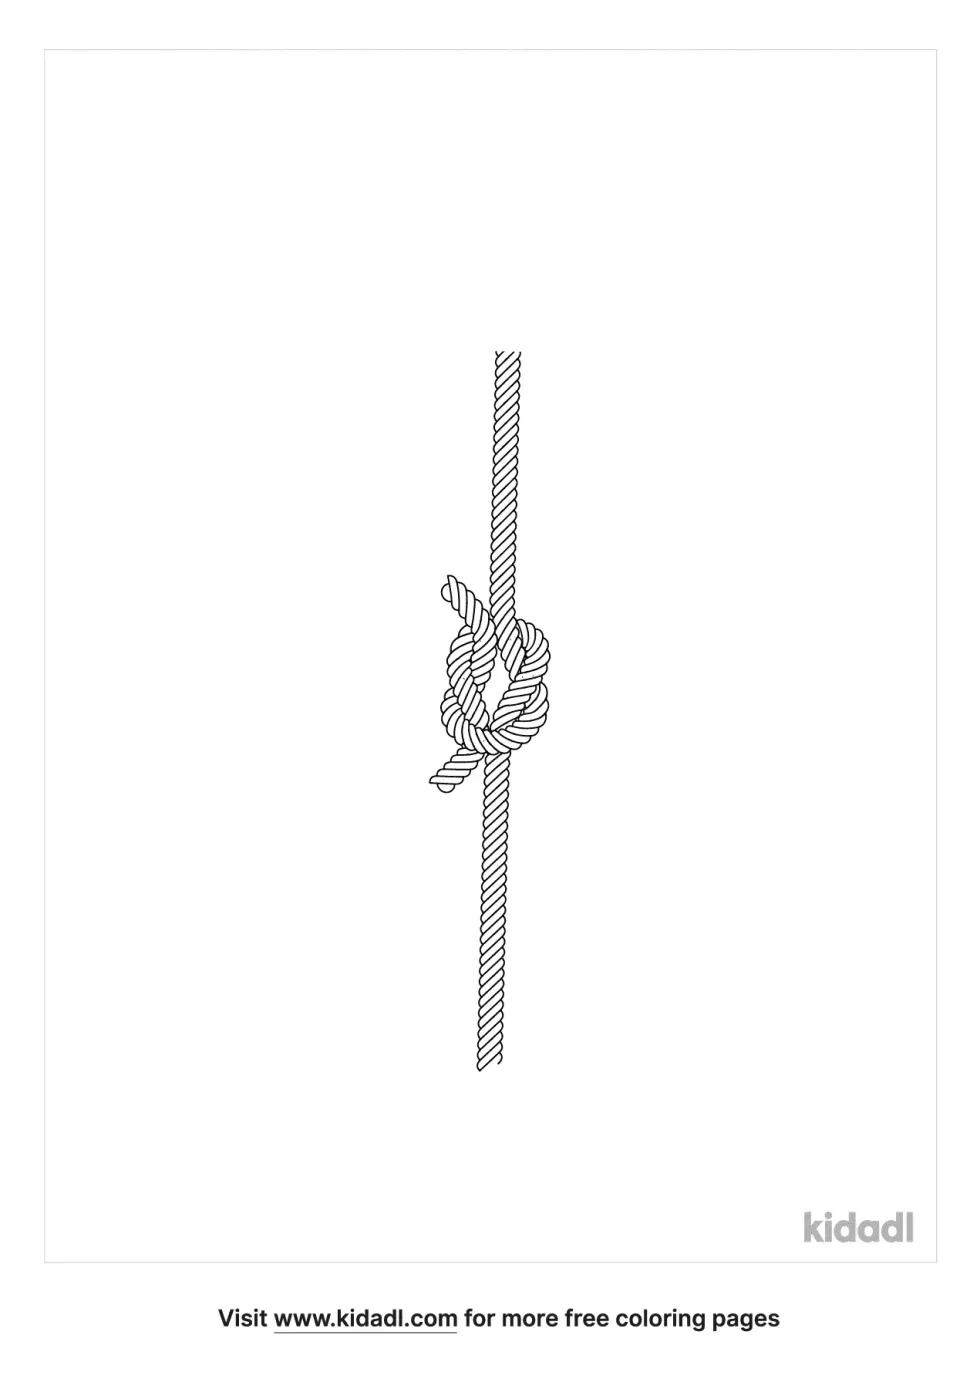 Tie Two Pieces Of String Together Coloring Page